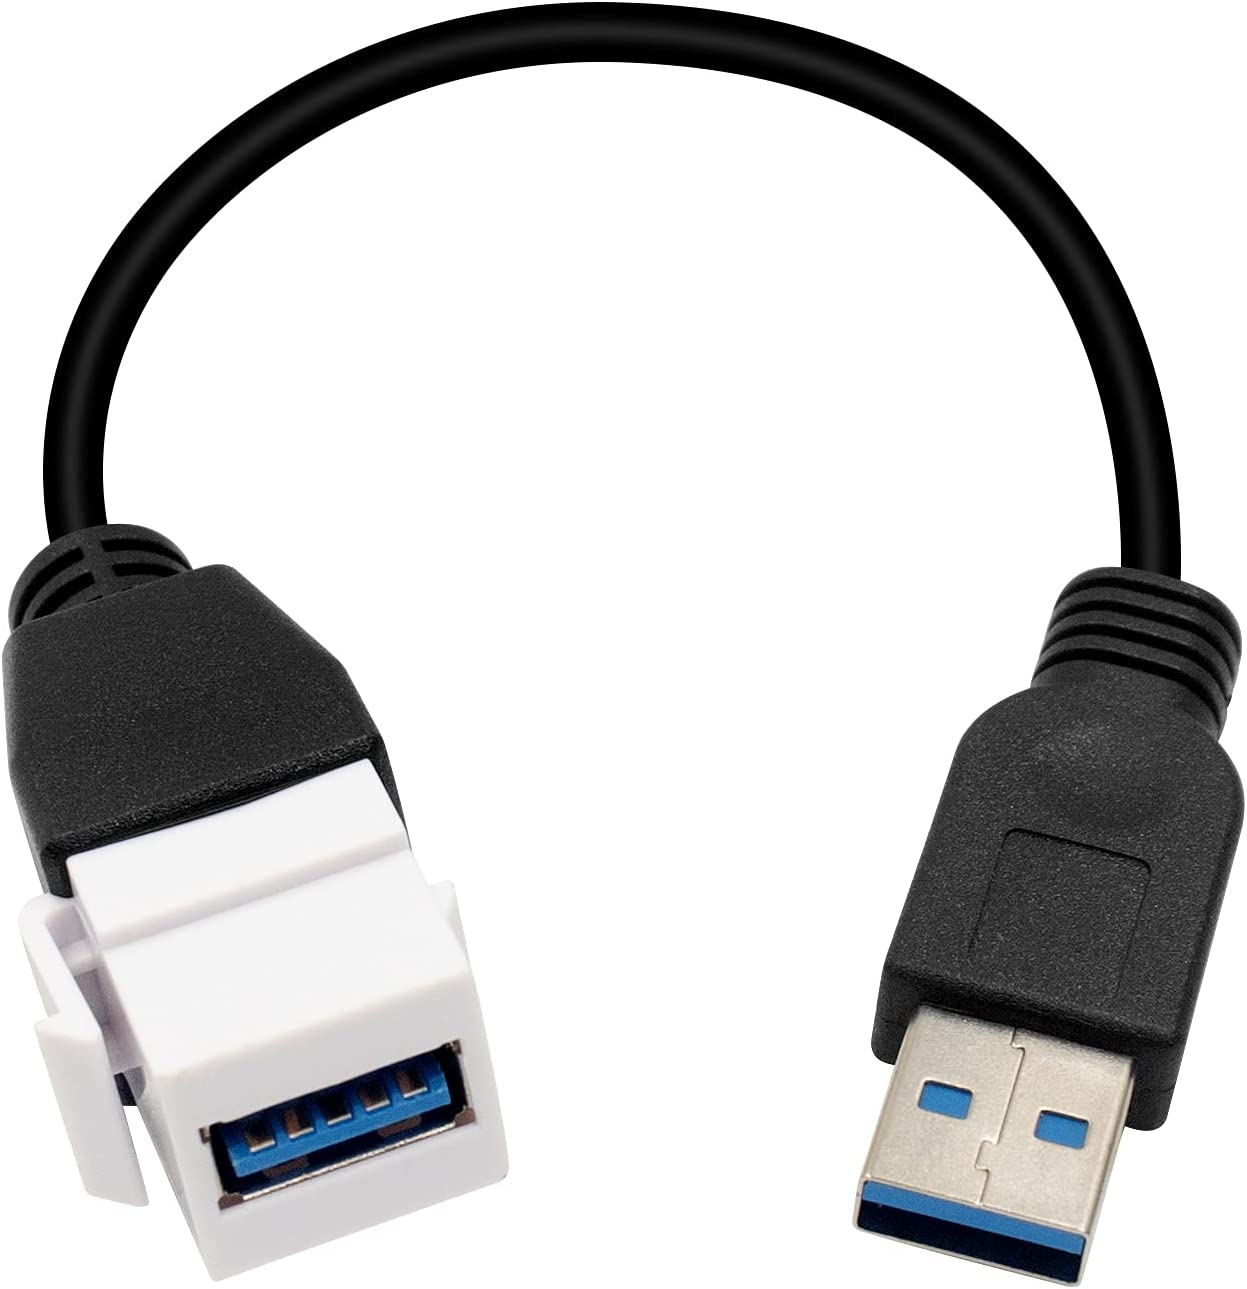 USB3.0 Keystone Jack Insert Cable for Wall Plate Outlet Panel